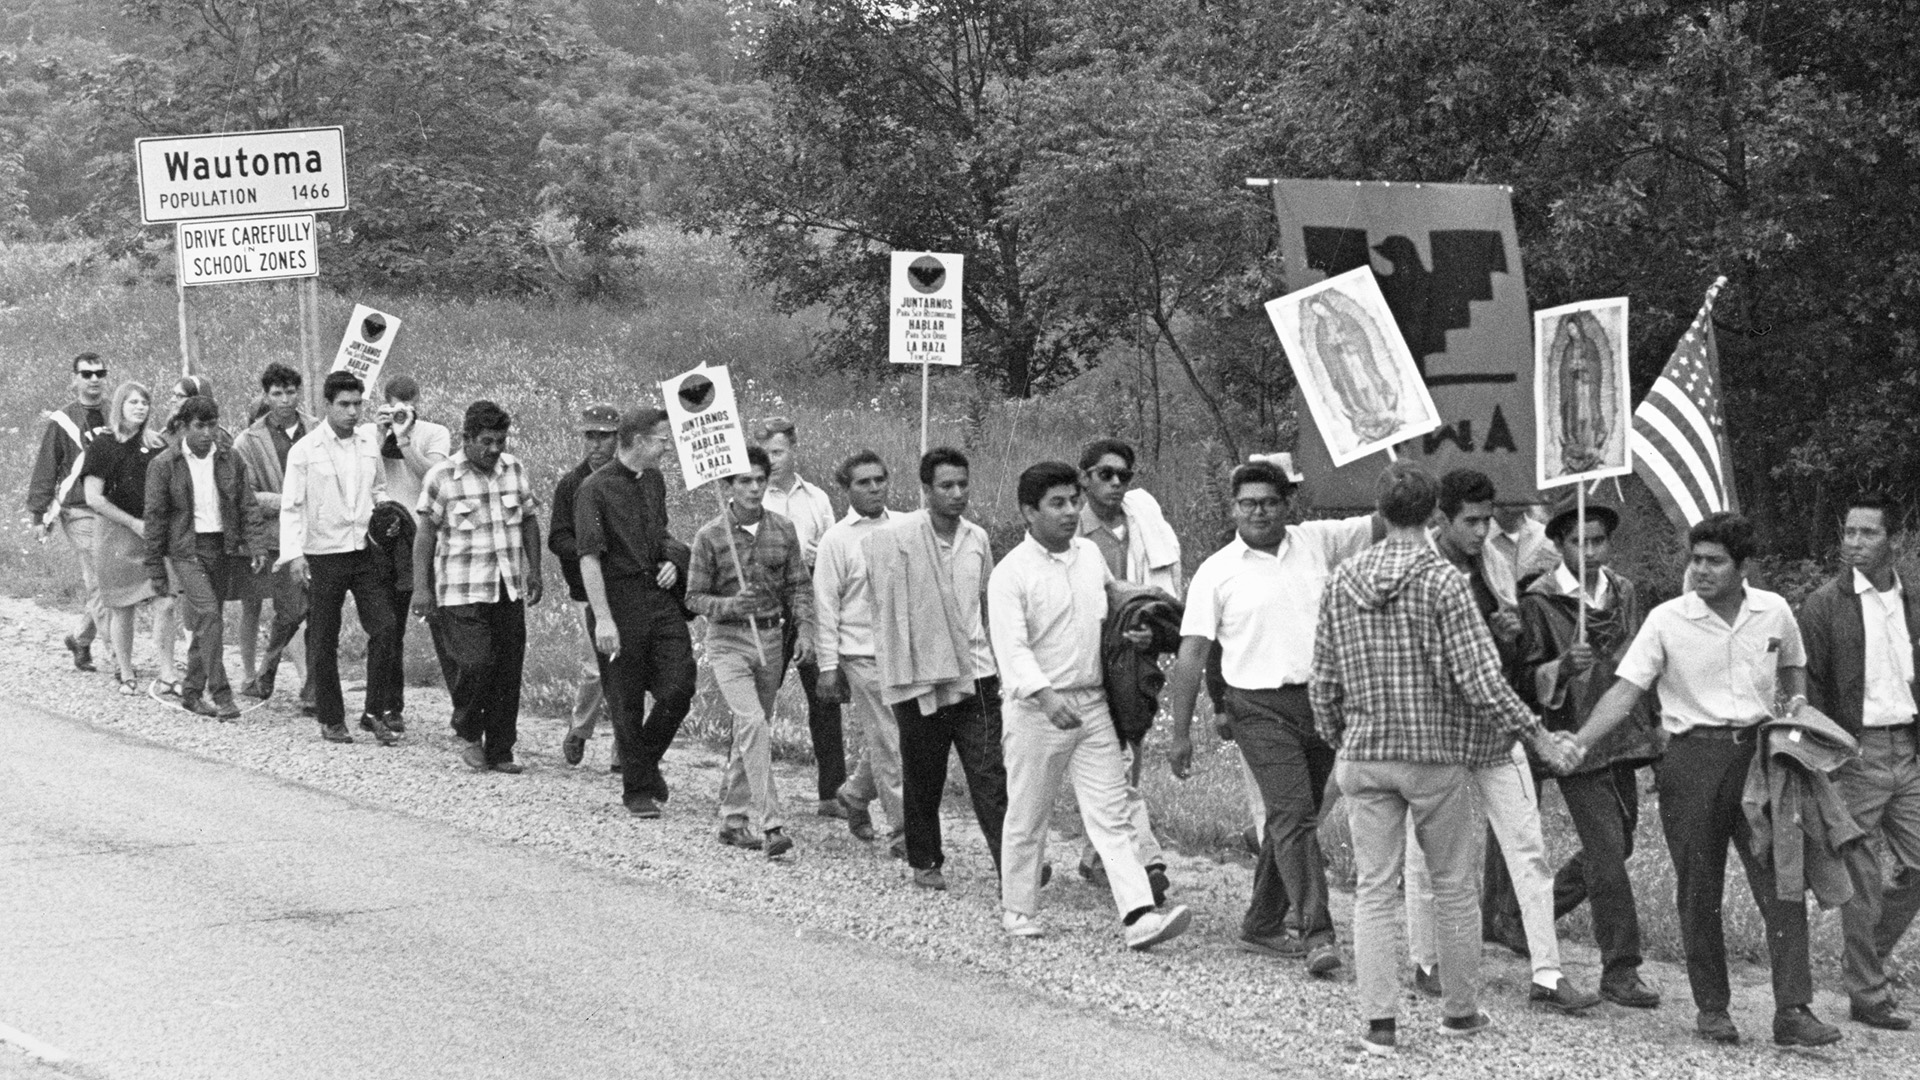 A black-and-white photo of people holding signs and a U.S. flag while marching along a gravel shoulder to a road with a "Wautoma, Population 1466" sign and trees in the background.